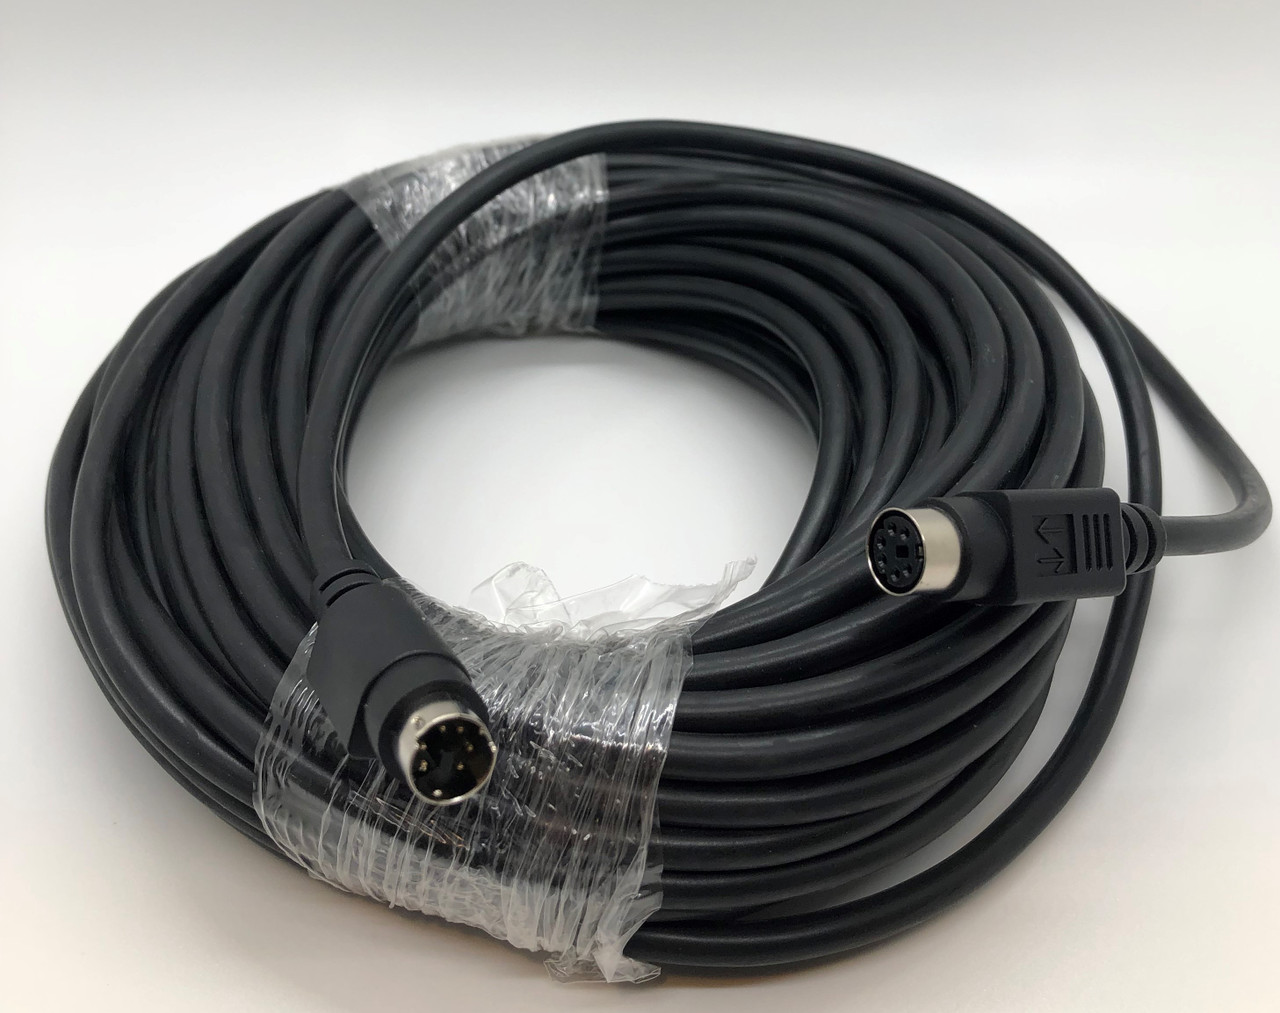 Mini Din 6 Pin Male Female 50 Foot Cable Black Color - Kraydad's Cables and  Parts